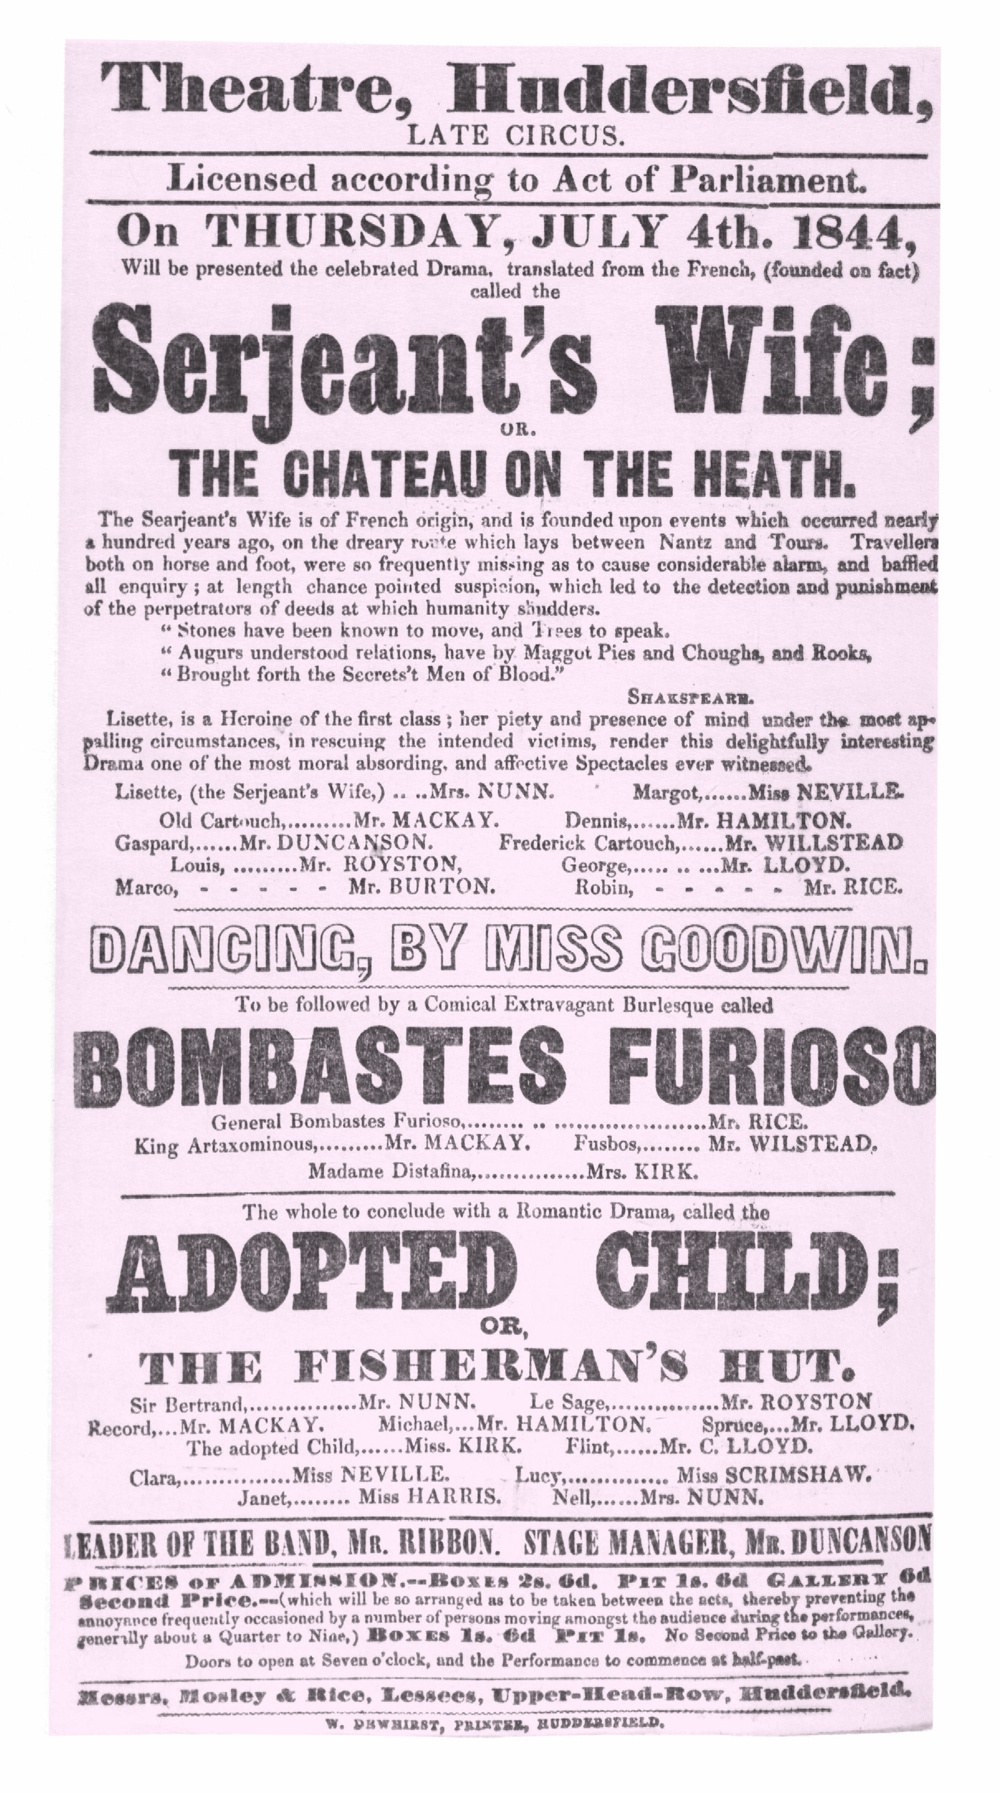 A playbill from July 1844. Main listings are for the Serjeant's Wife and the Adopted Child.